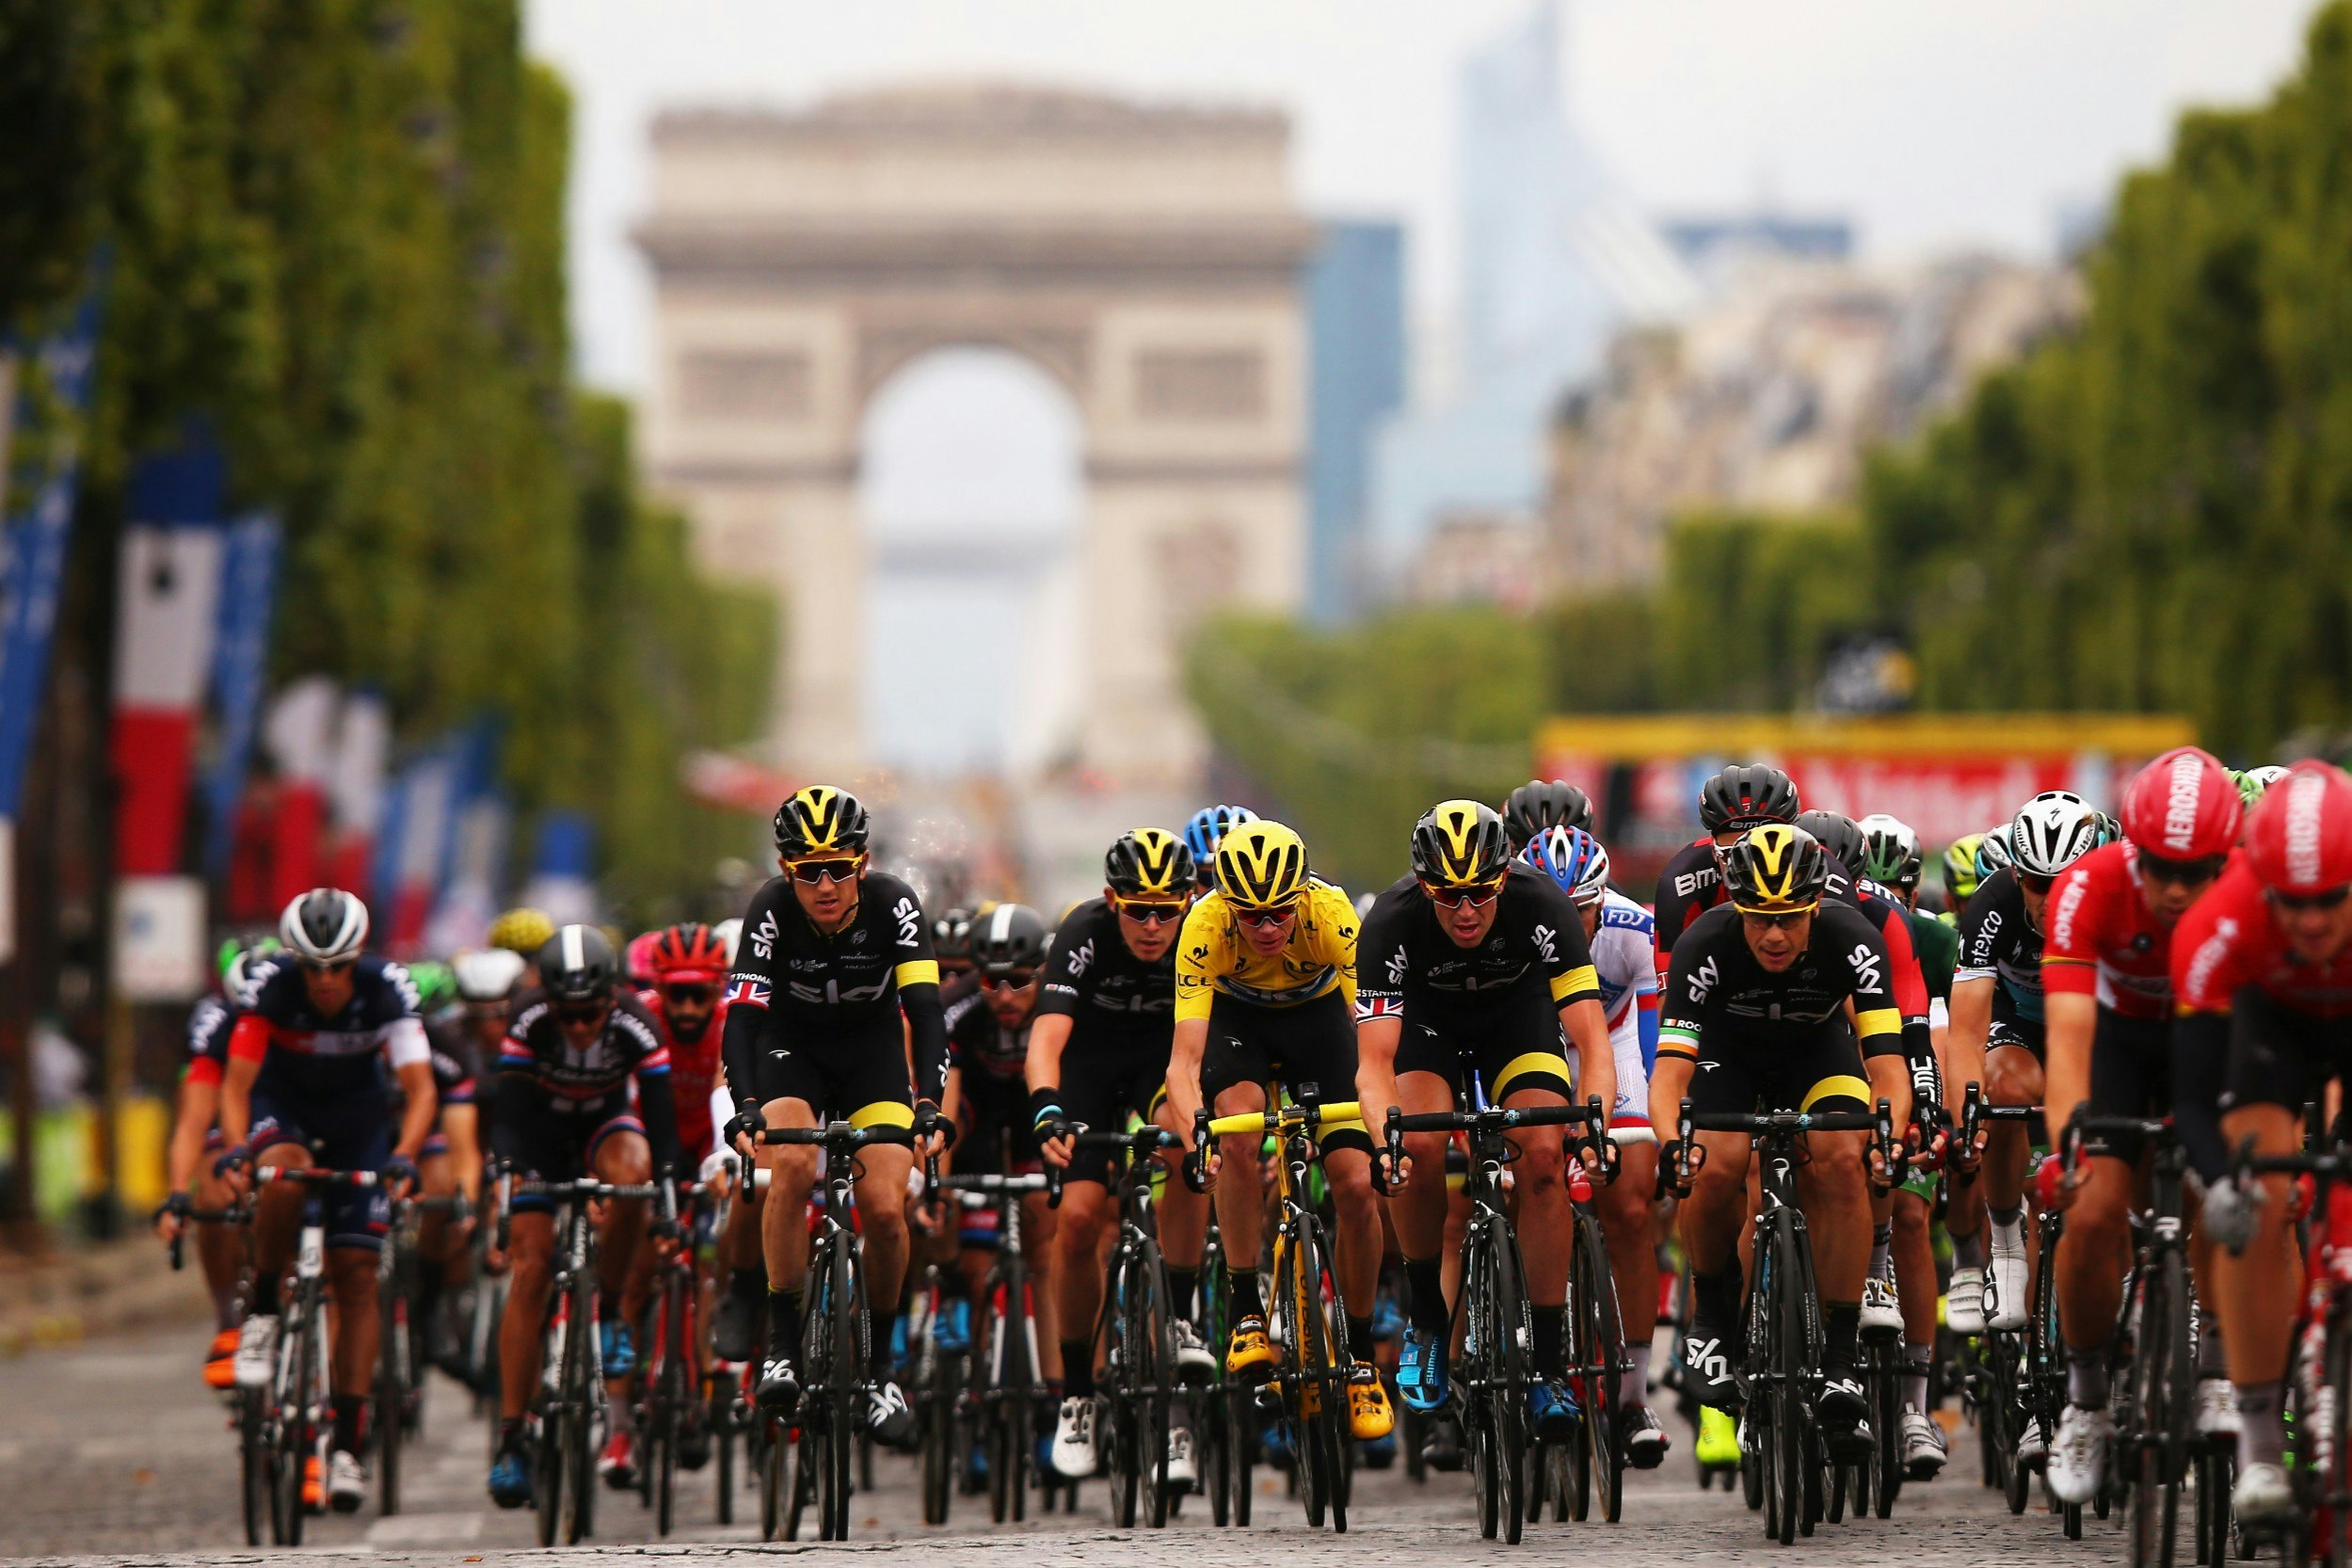 Cyclists at the start of the Tour de France in Paris